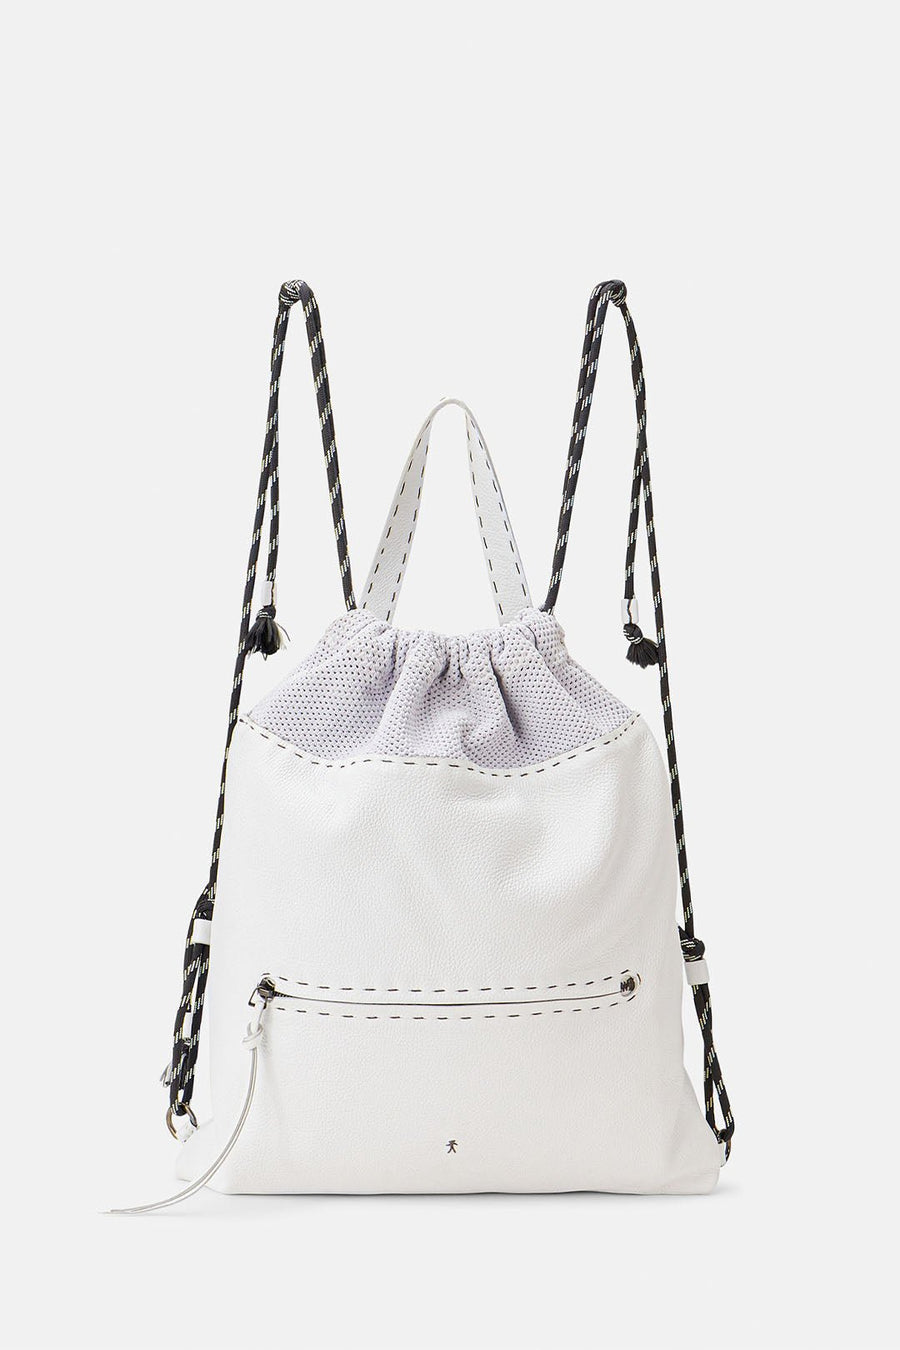 HENRY BEGUELIN SMALL BACKPACK, WHITE - Burning Torch Online Boutique